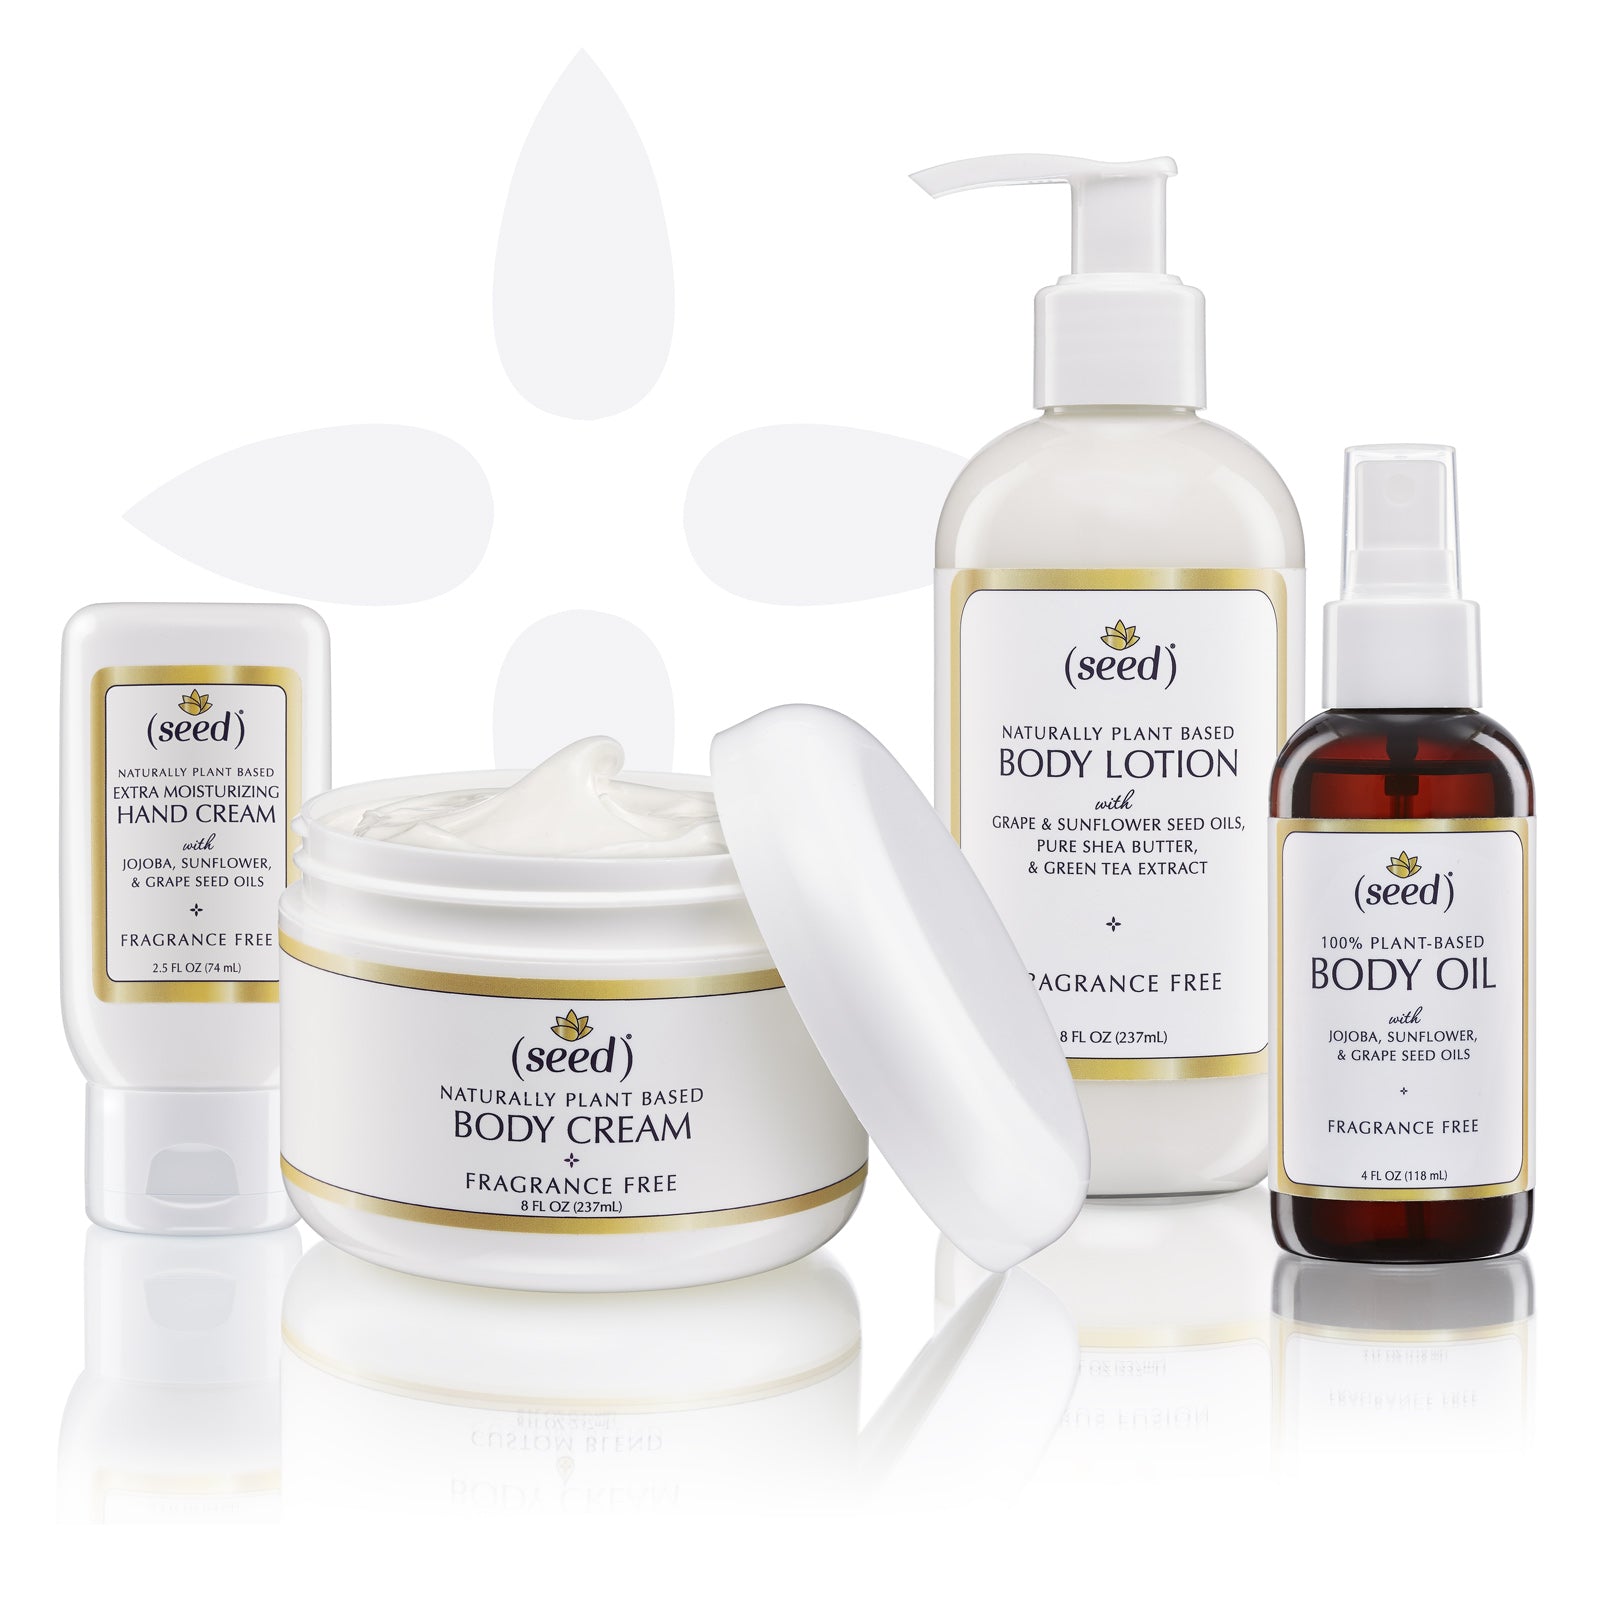 Seed Fragrance Free Deluxe Set with Hand Cream, Body Cream, Body Lotion and Body Oil